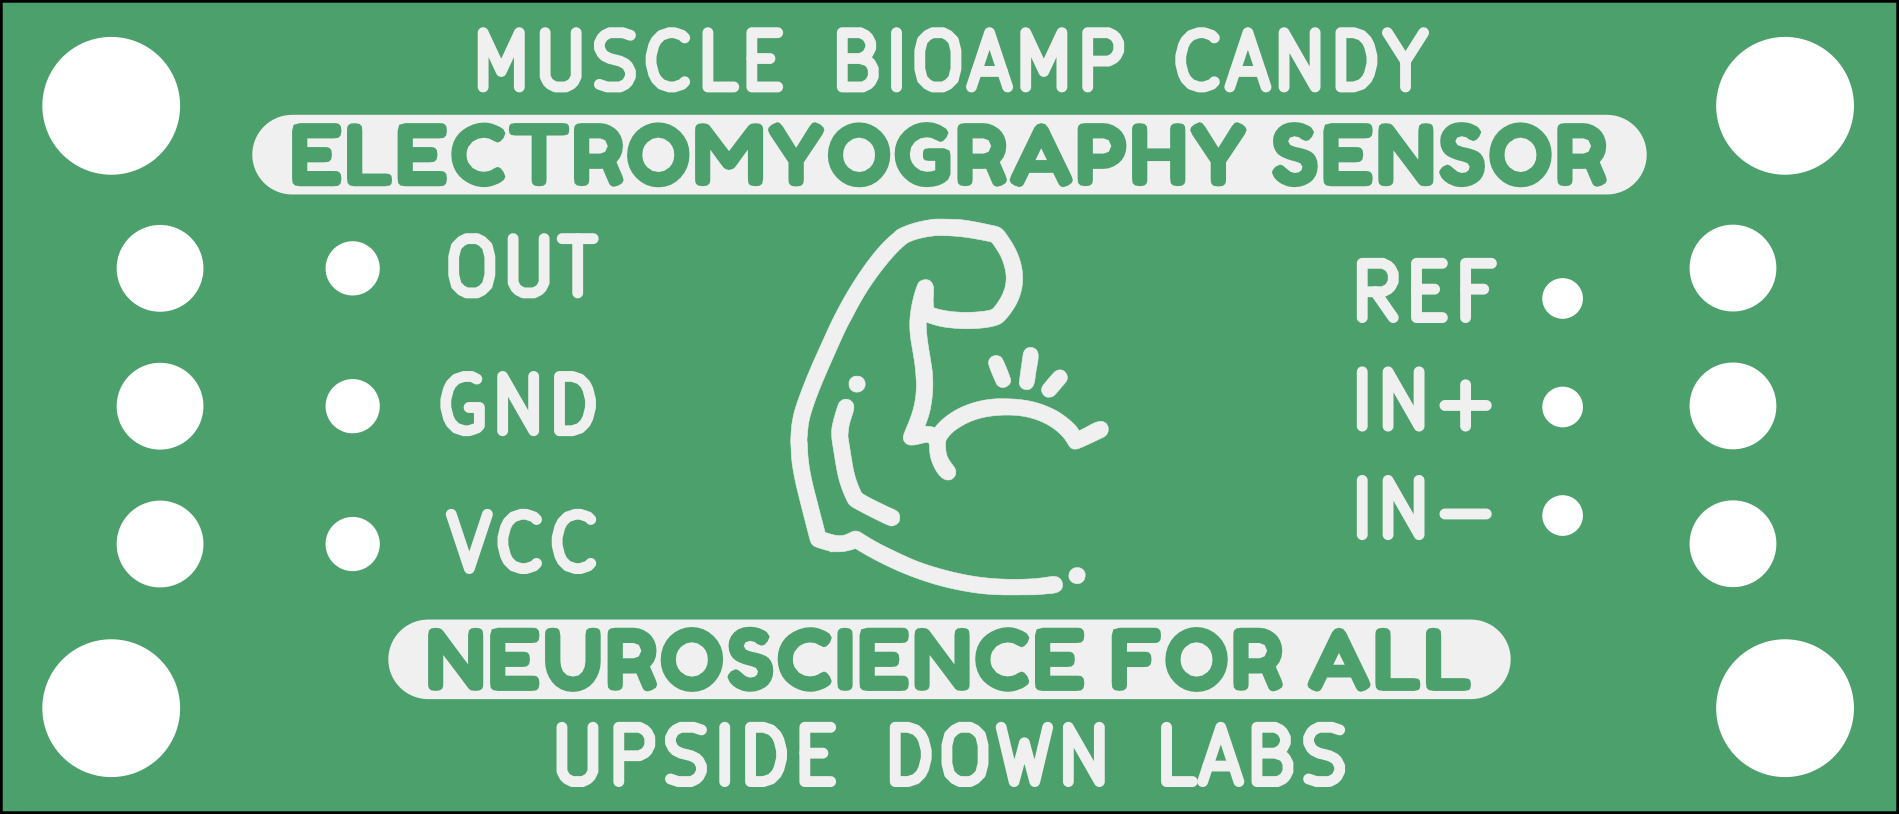 Upside Down Labs Muscle BioAmp Candy back